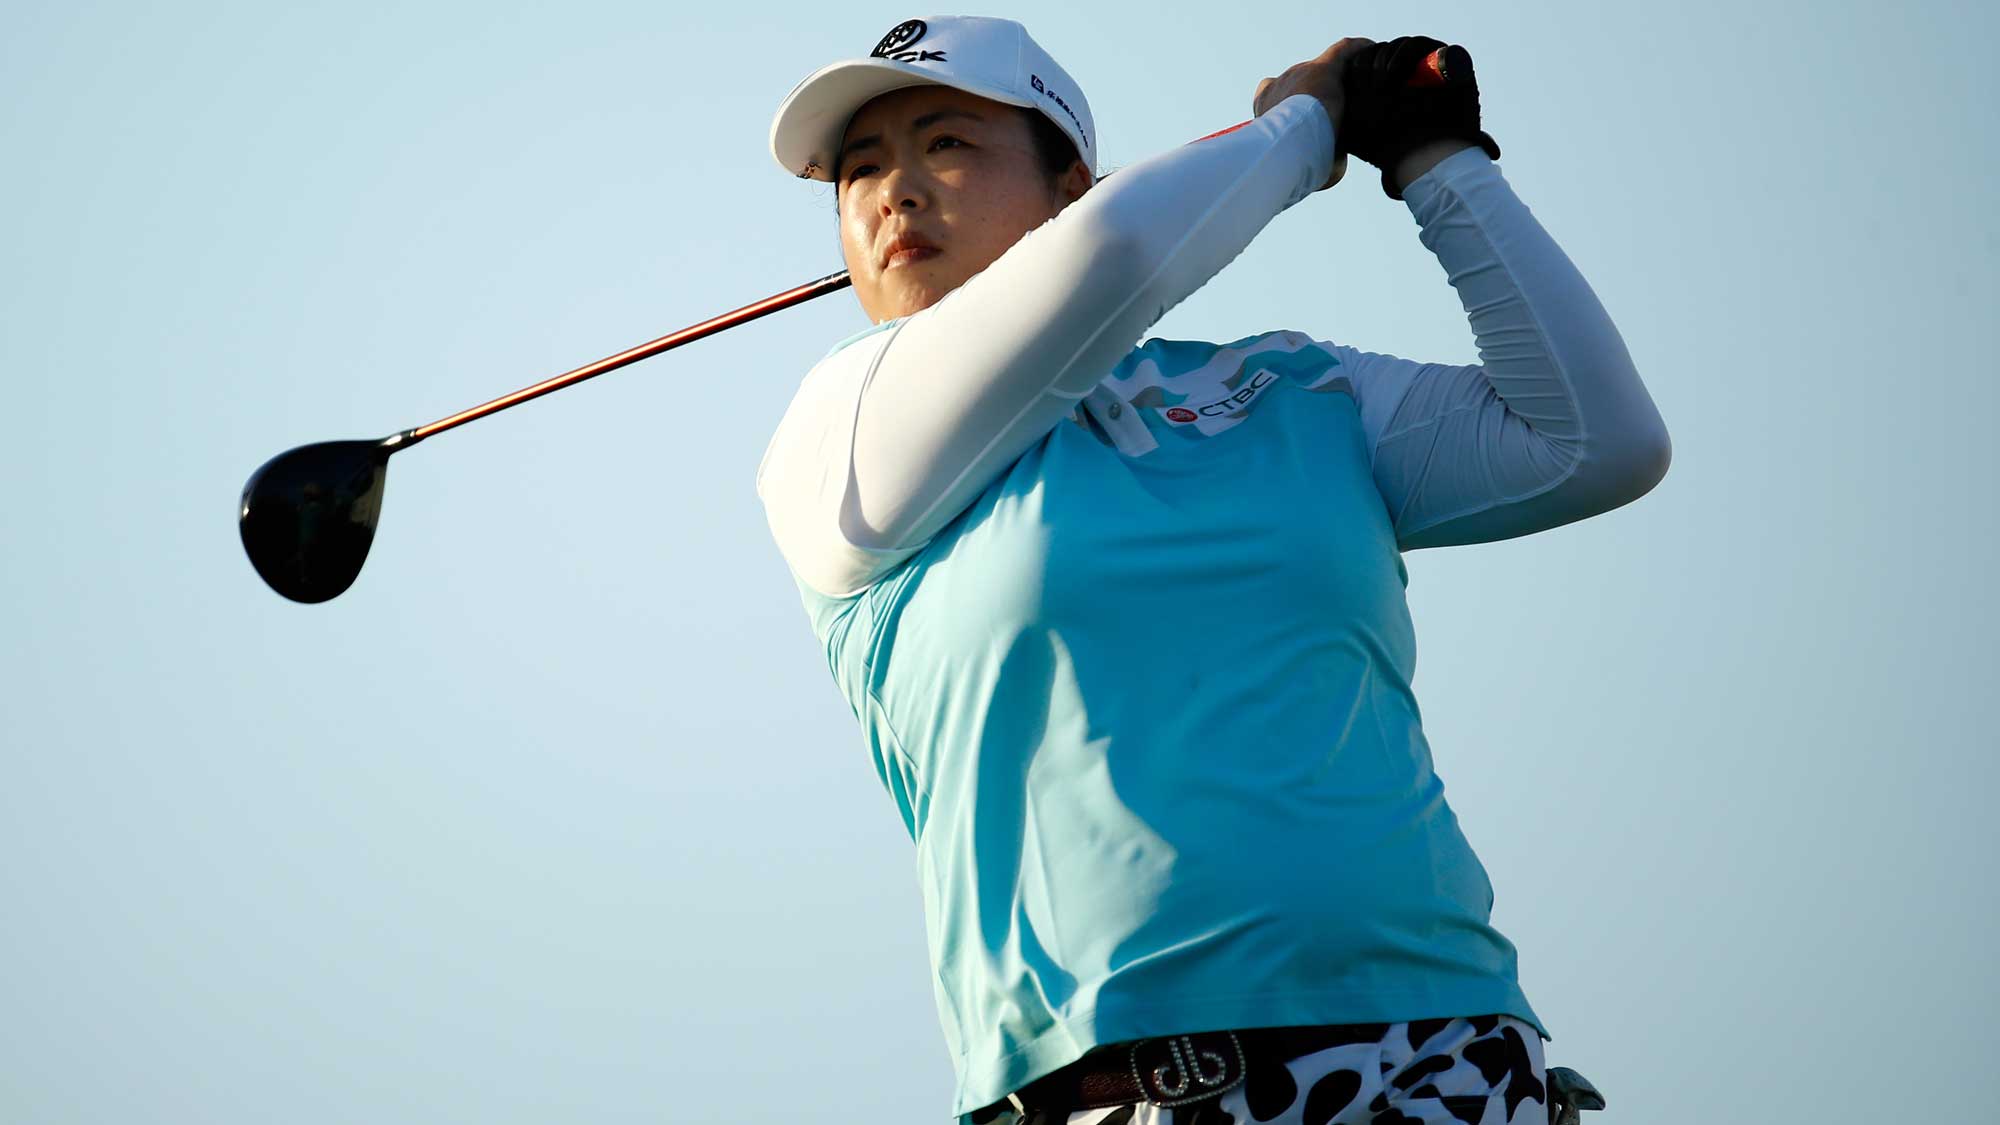 Shanshan Feng of China hits her tee shot on the 16th hole during the second round of the Pure Silk Bahamas LPGA Classic